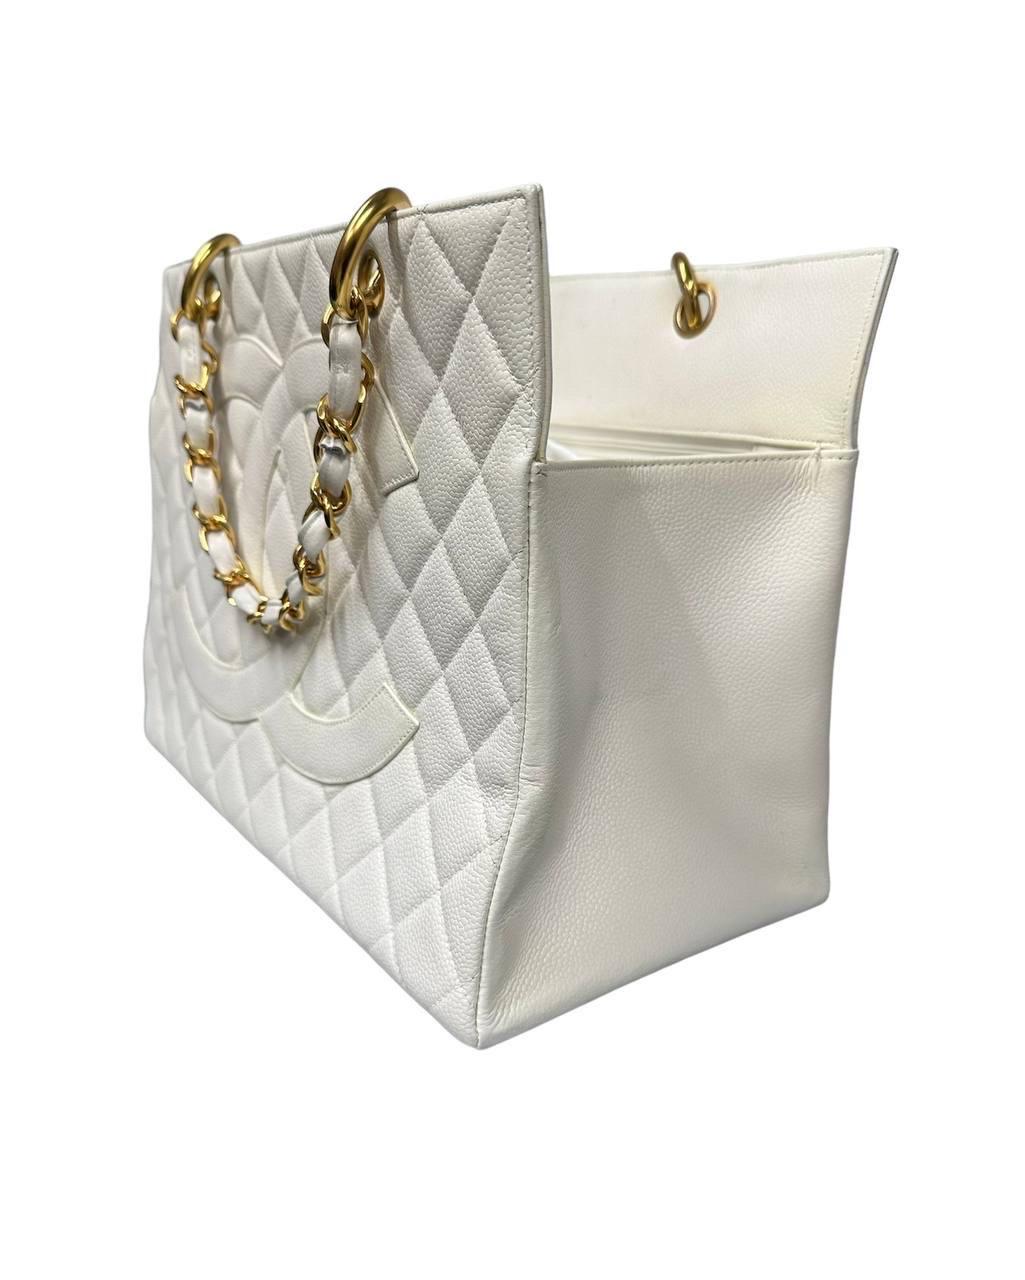 Chanel signed bag, GST model, made of white quilted leather with gold hardware. Equipped with two central handles in white leather and intertwined chain. It has a large central opening, internally lined in white leather, has two pockets with and